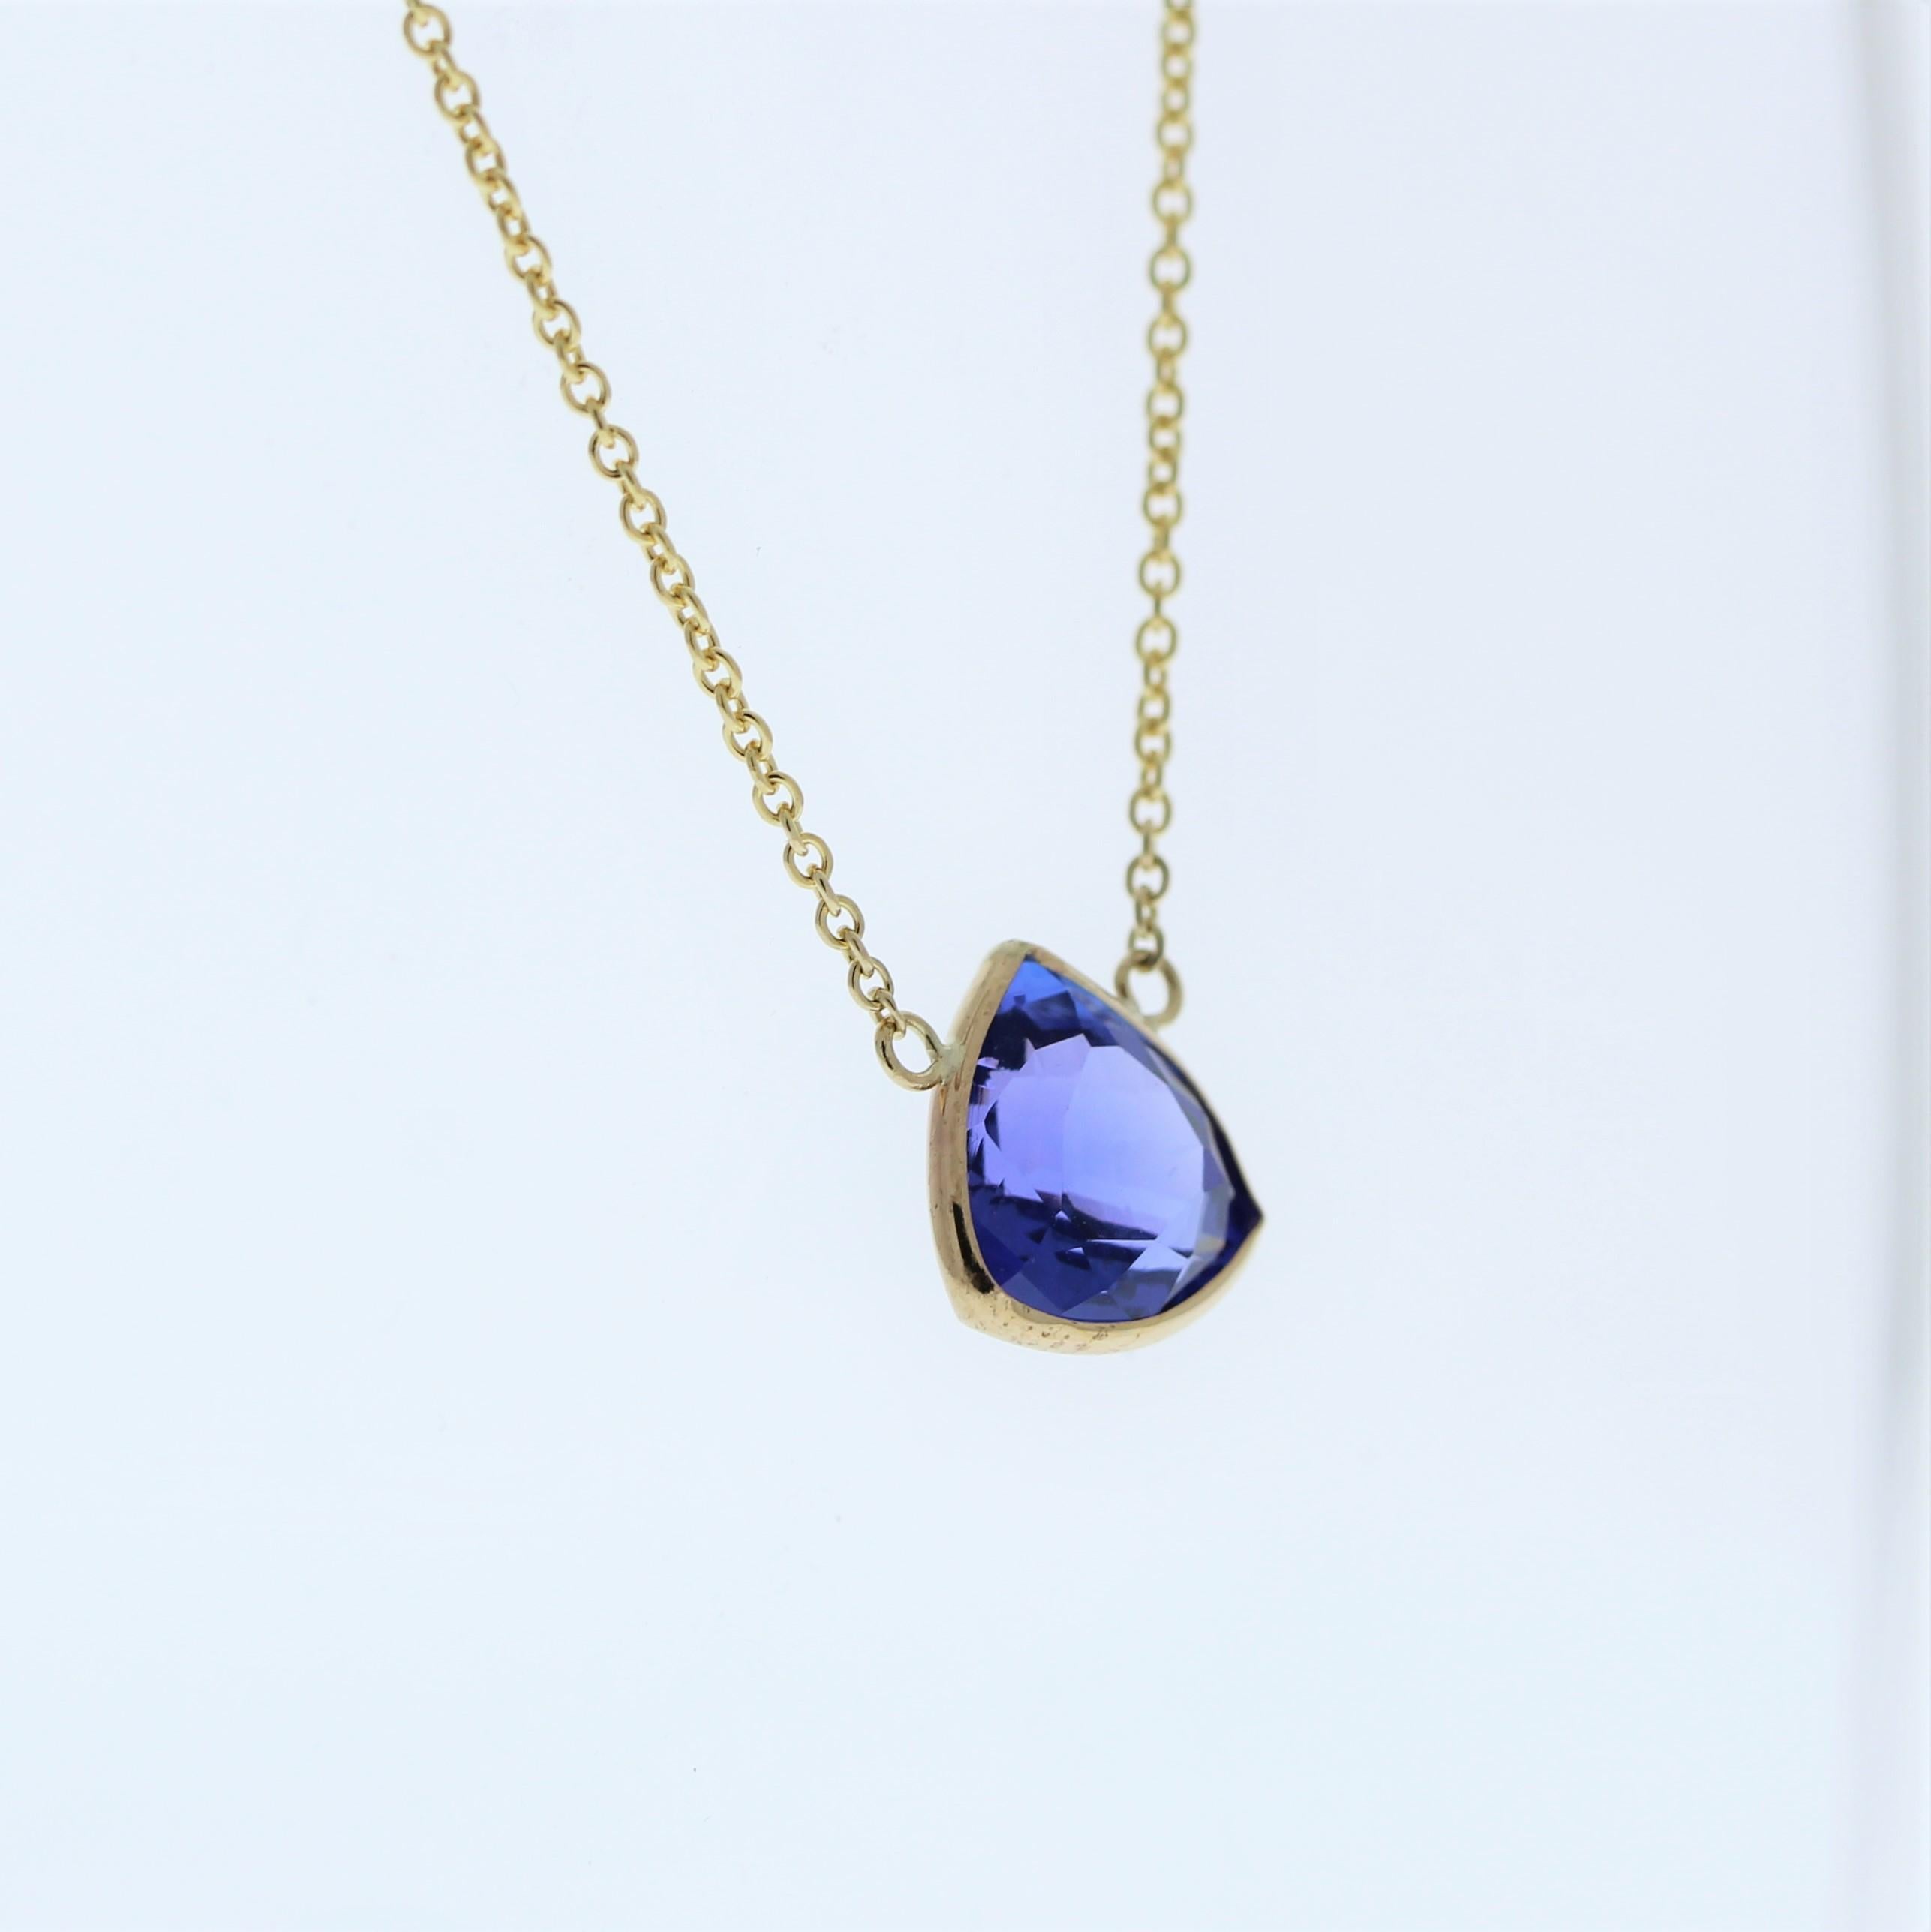 The necklace features a 2.82-carat trilliant-cut tanzanite set in a 14 karat yellow gold pendant or setting. The trilliant cut and the unique blue-violet color of the tanzanite against the yellow gold setting are likely to create an elegant and